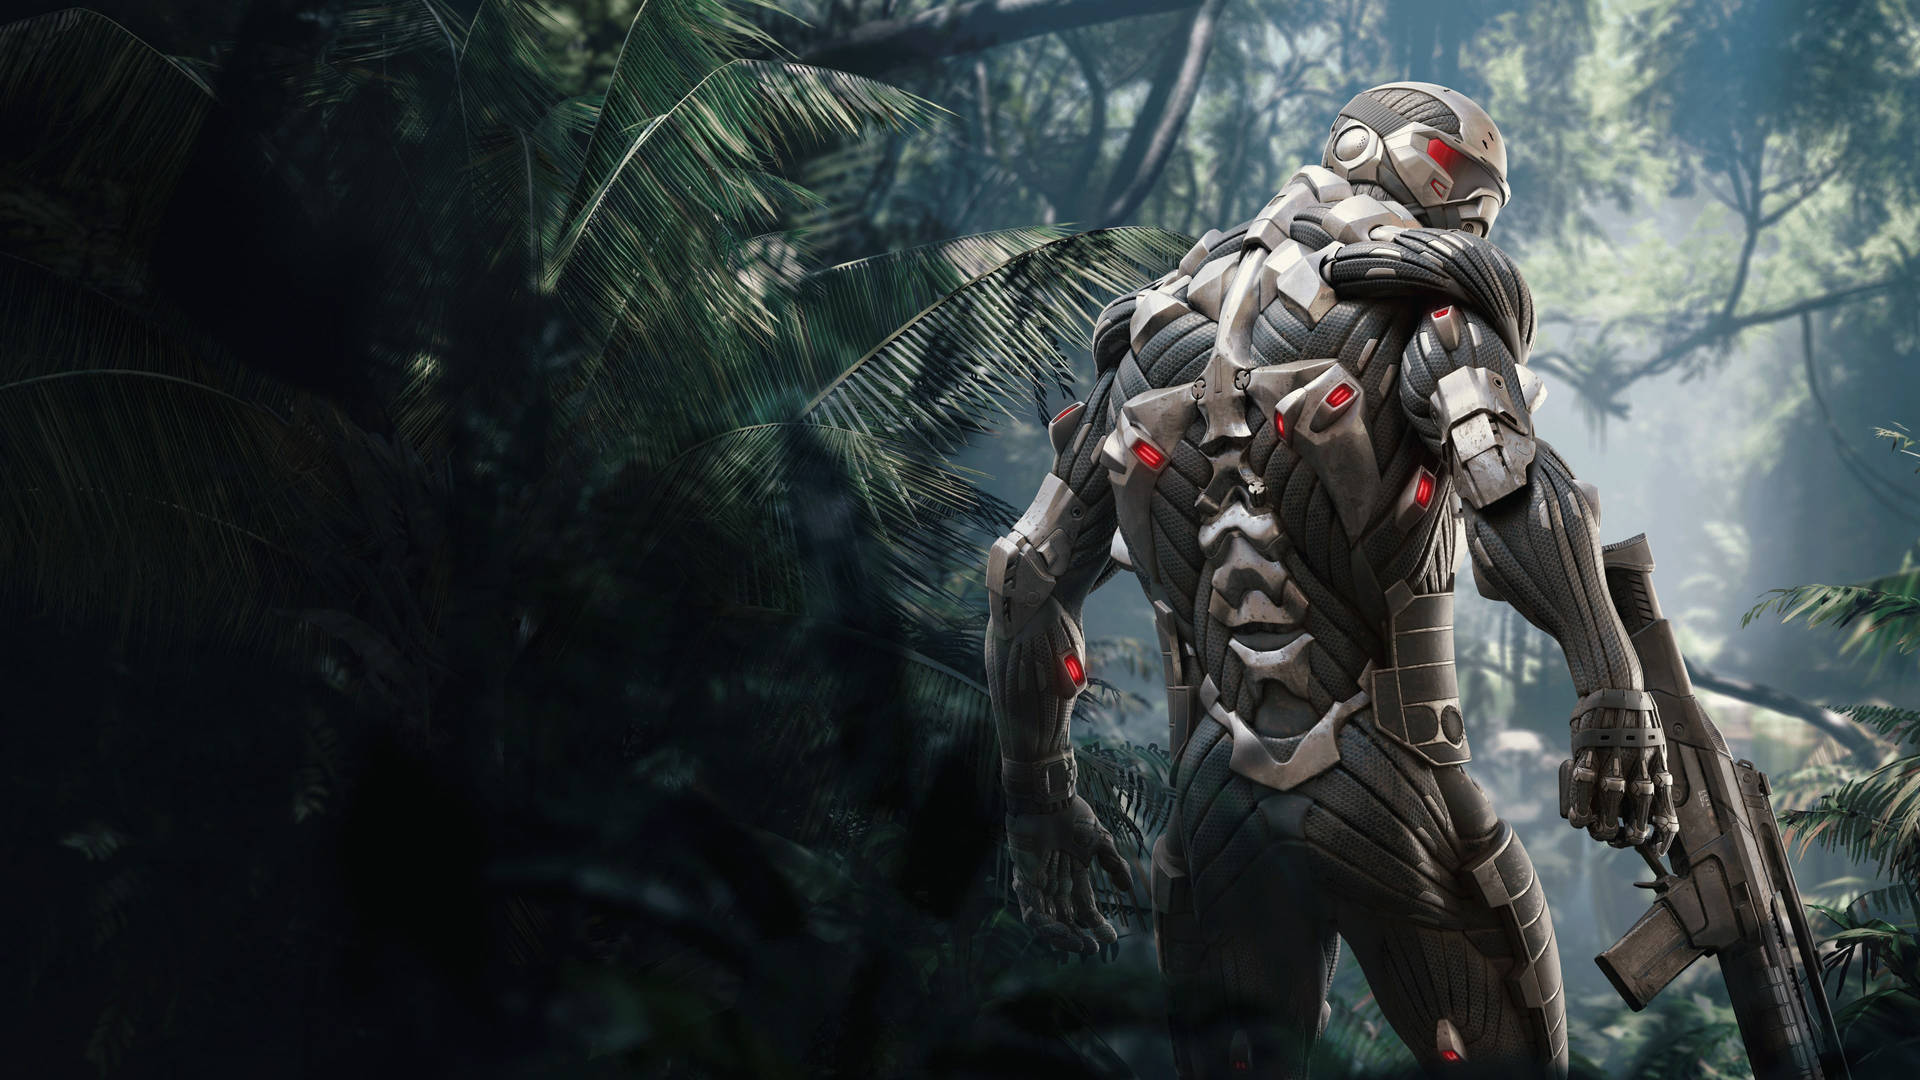 Prepare to be blown away by Crysis Remastered Wallpaper